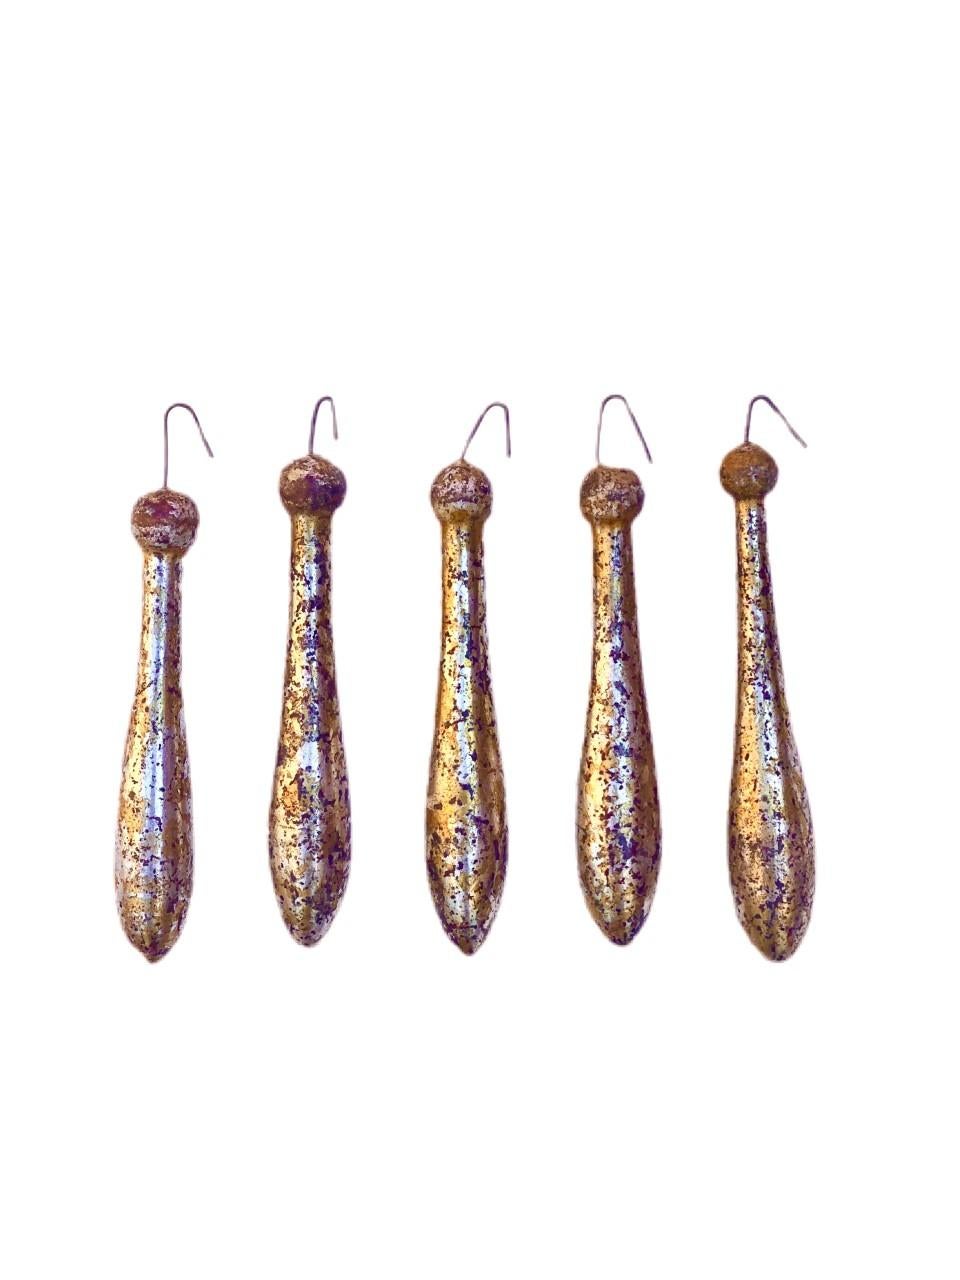 Hand-Painted 18th Century Italian Speckled Gold and Silver Leaf Tassel Ornaments 'Set of 5' For Sale